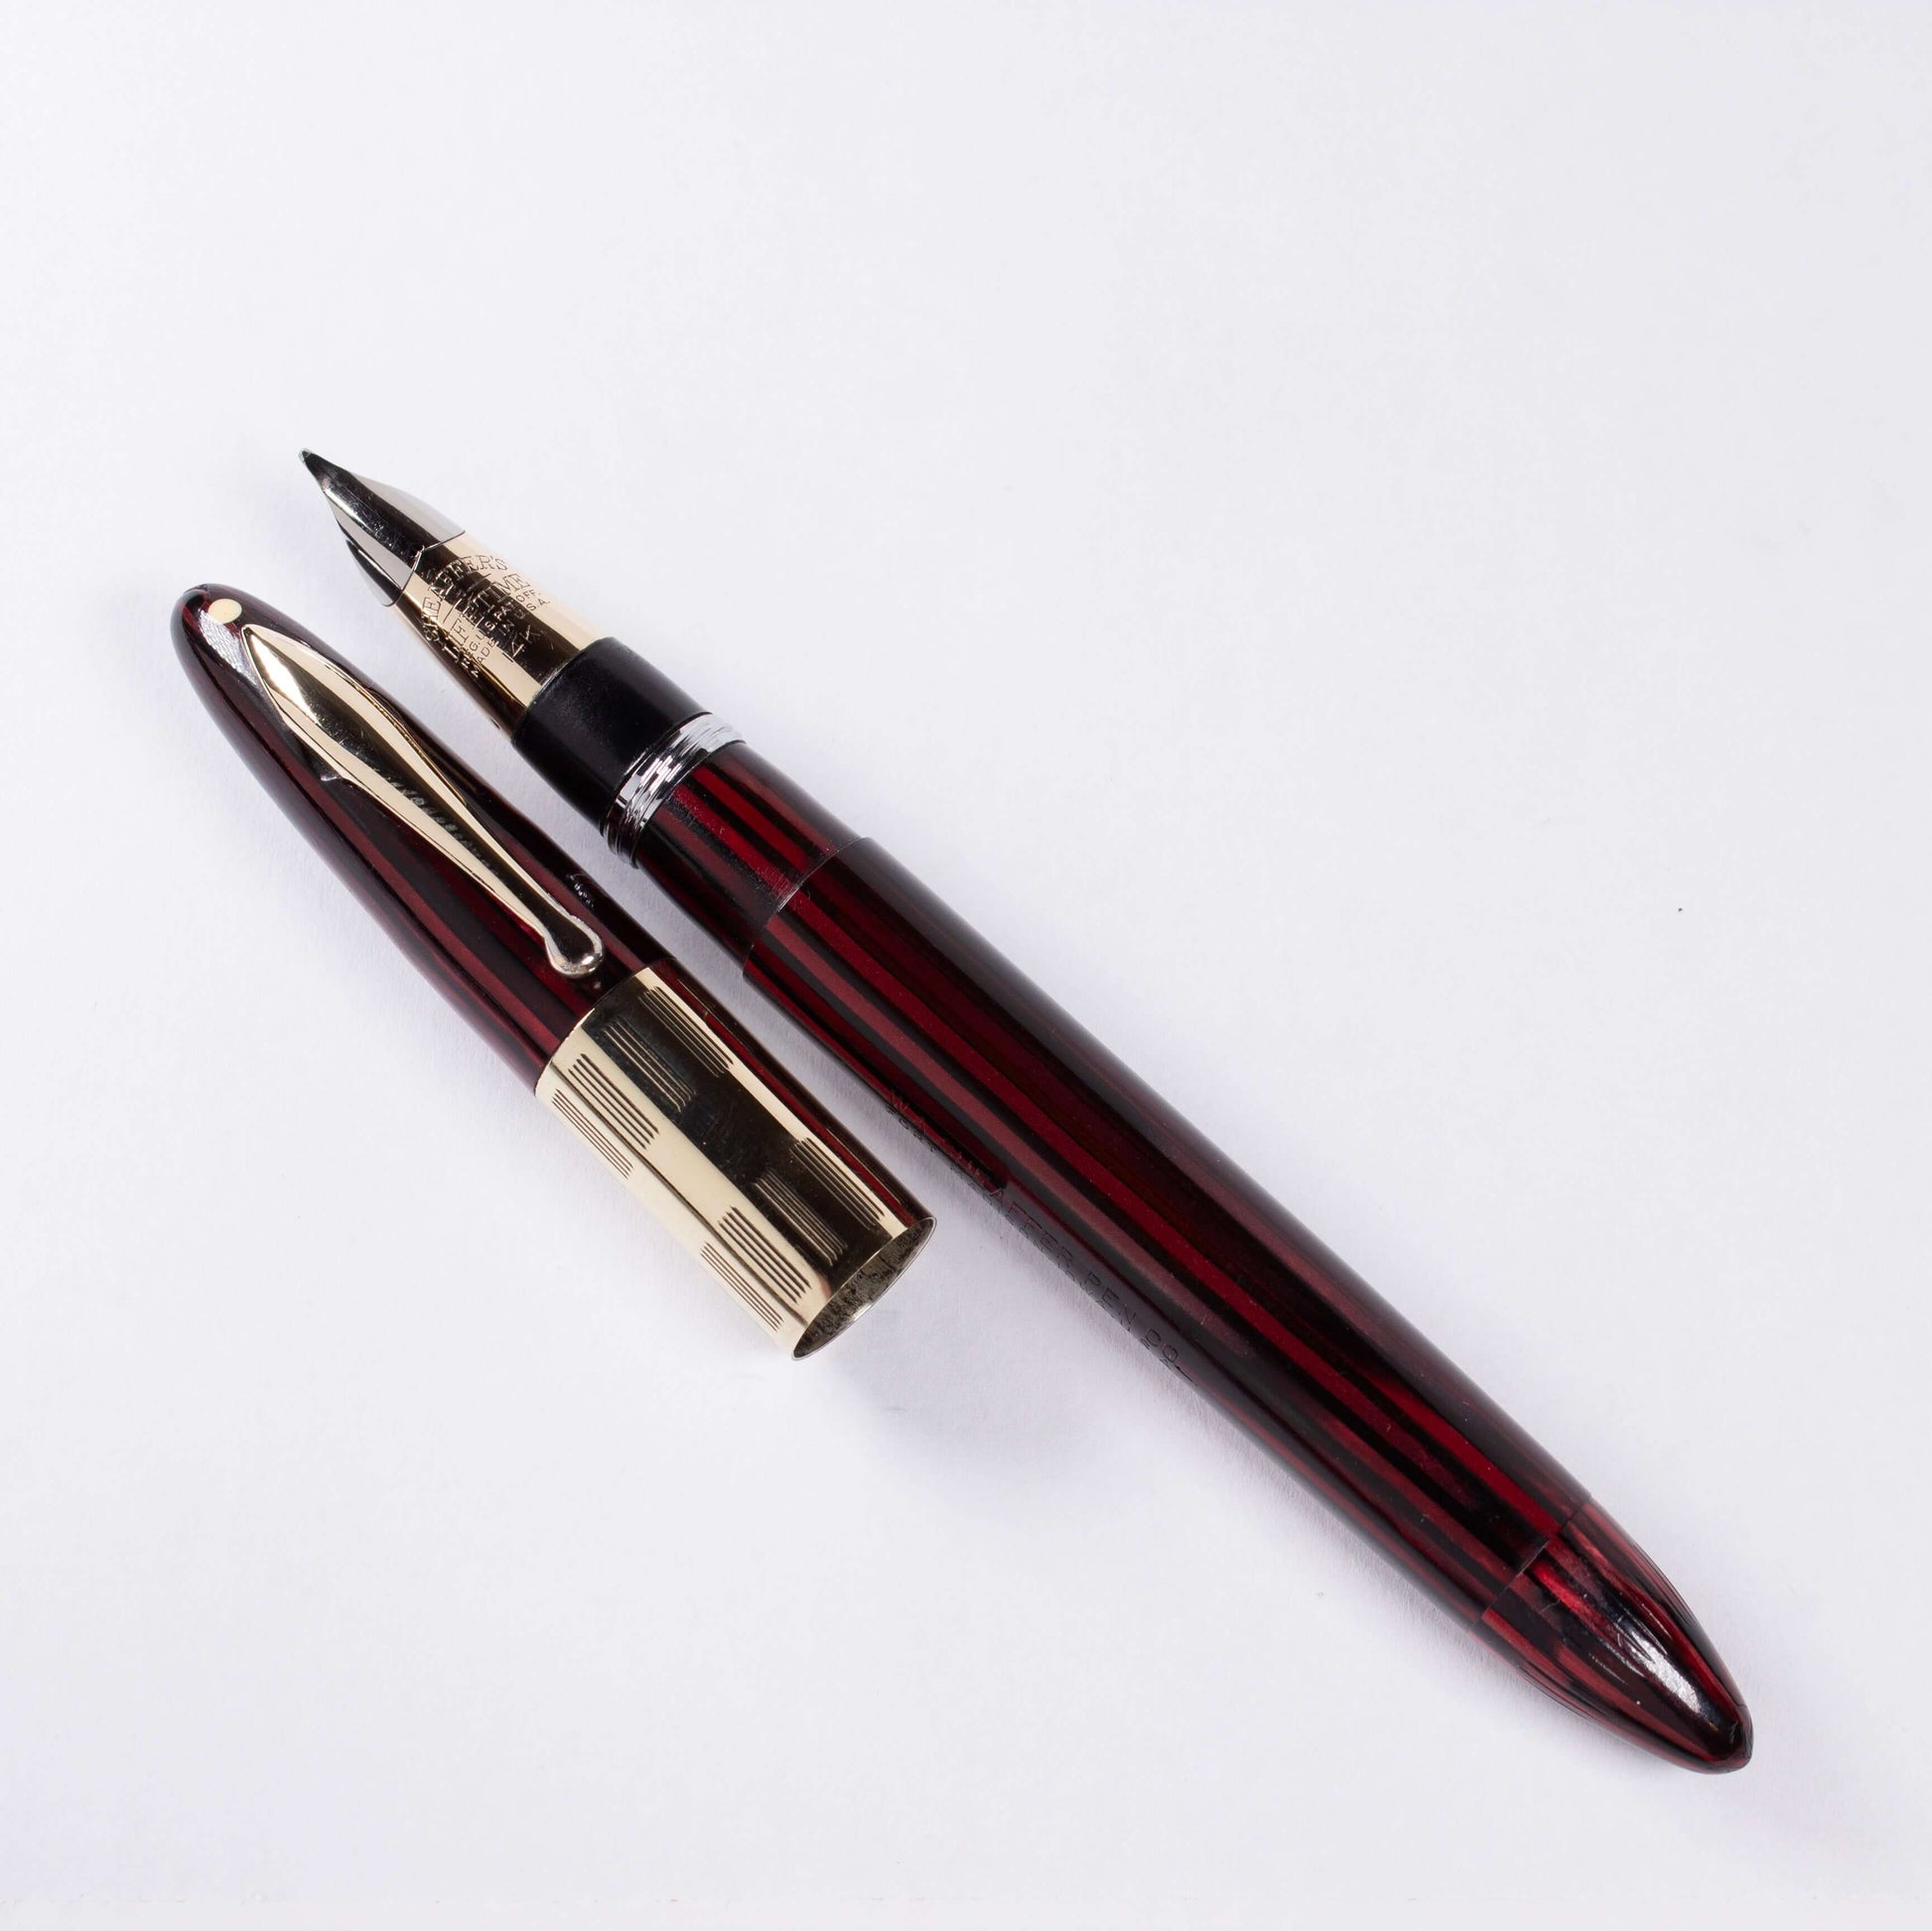 ${titleType: Vintage Vac-Fil Fountain Pen Product name: Sheaffer Triumph Vacuum-Fil Manufacturer and Year: 1940's Length: 5 1/8 inch Filling System: Vacuum-Fil, Plunger, restored with new section and piston Color/Pattern: Carmine Red Nib Type/Condition an